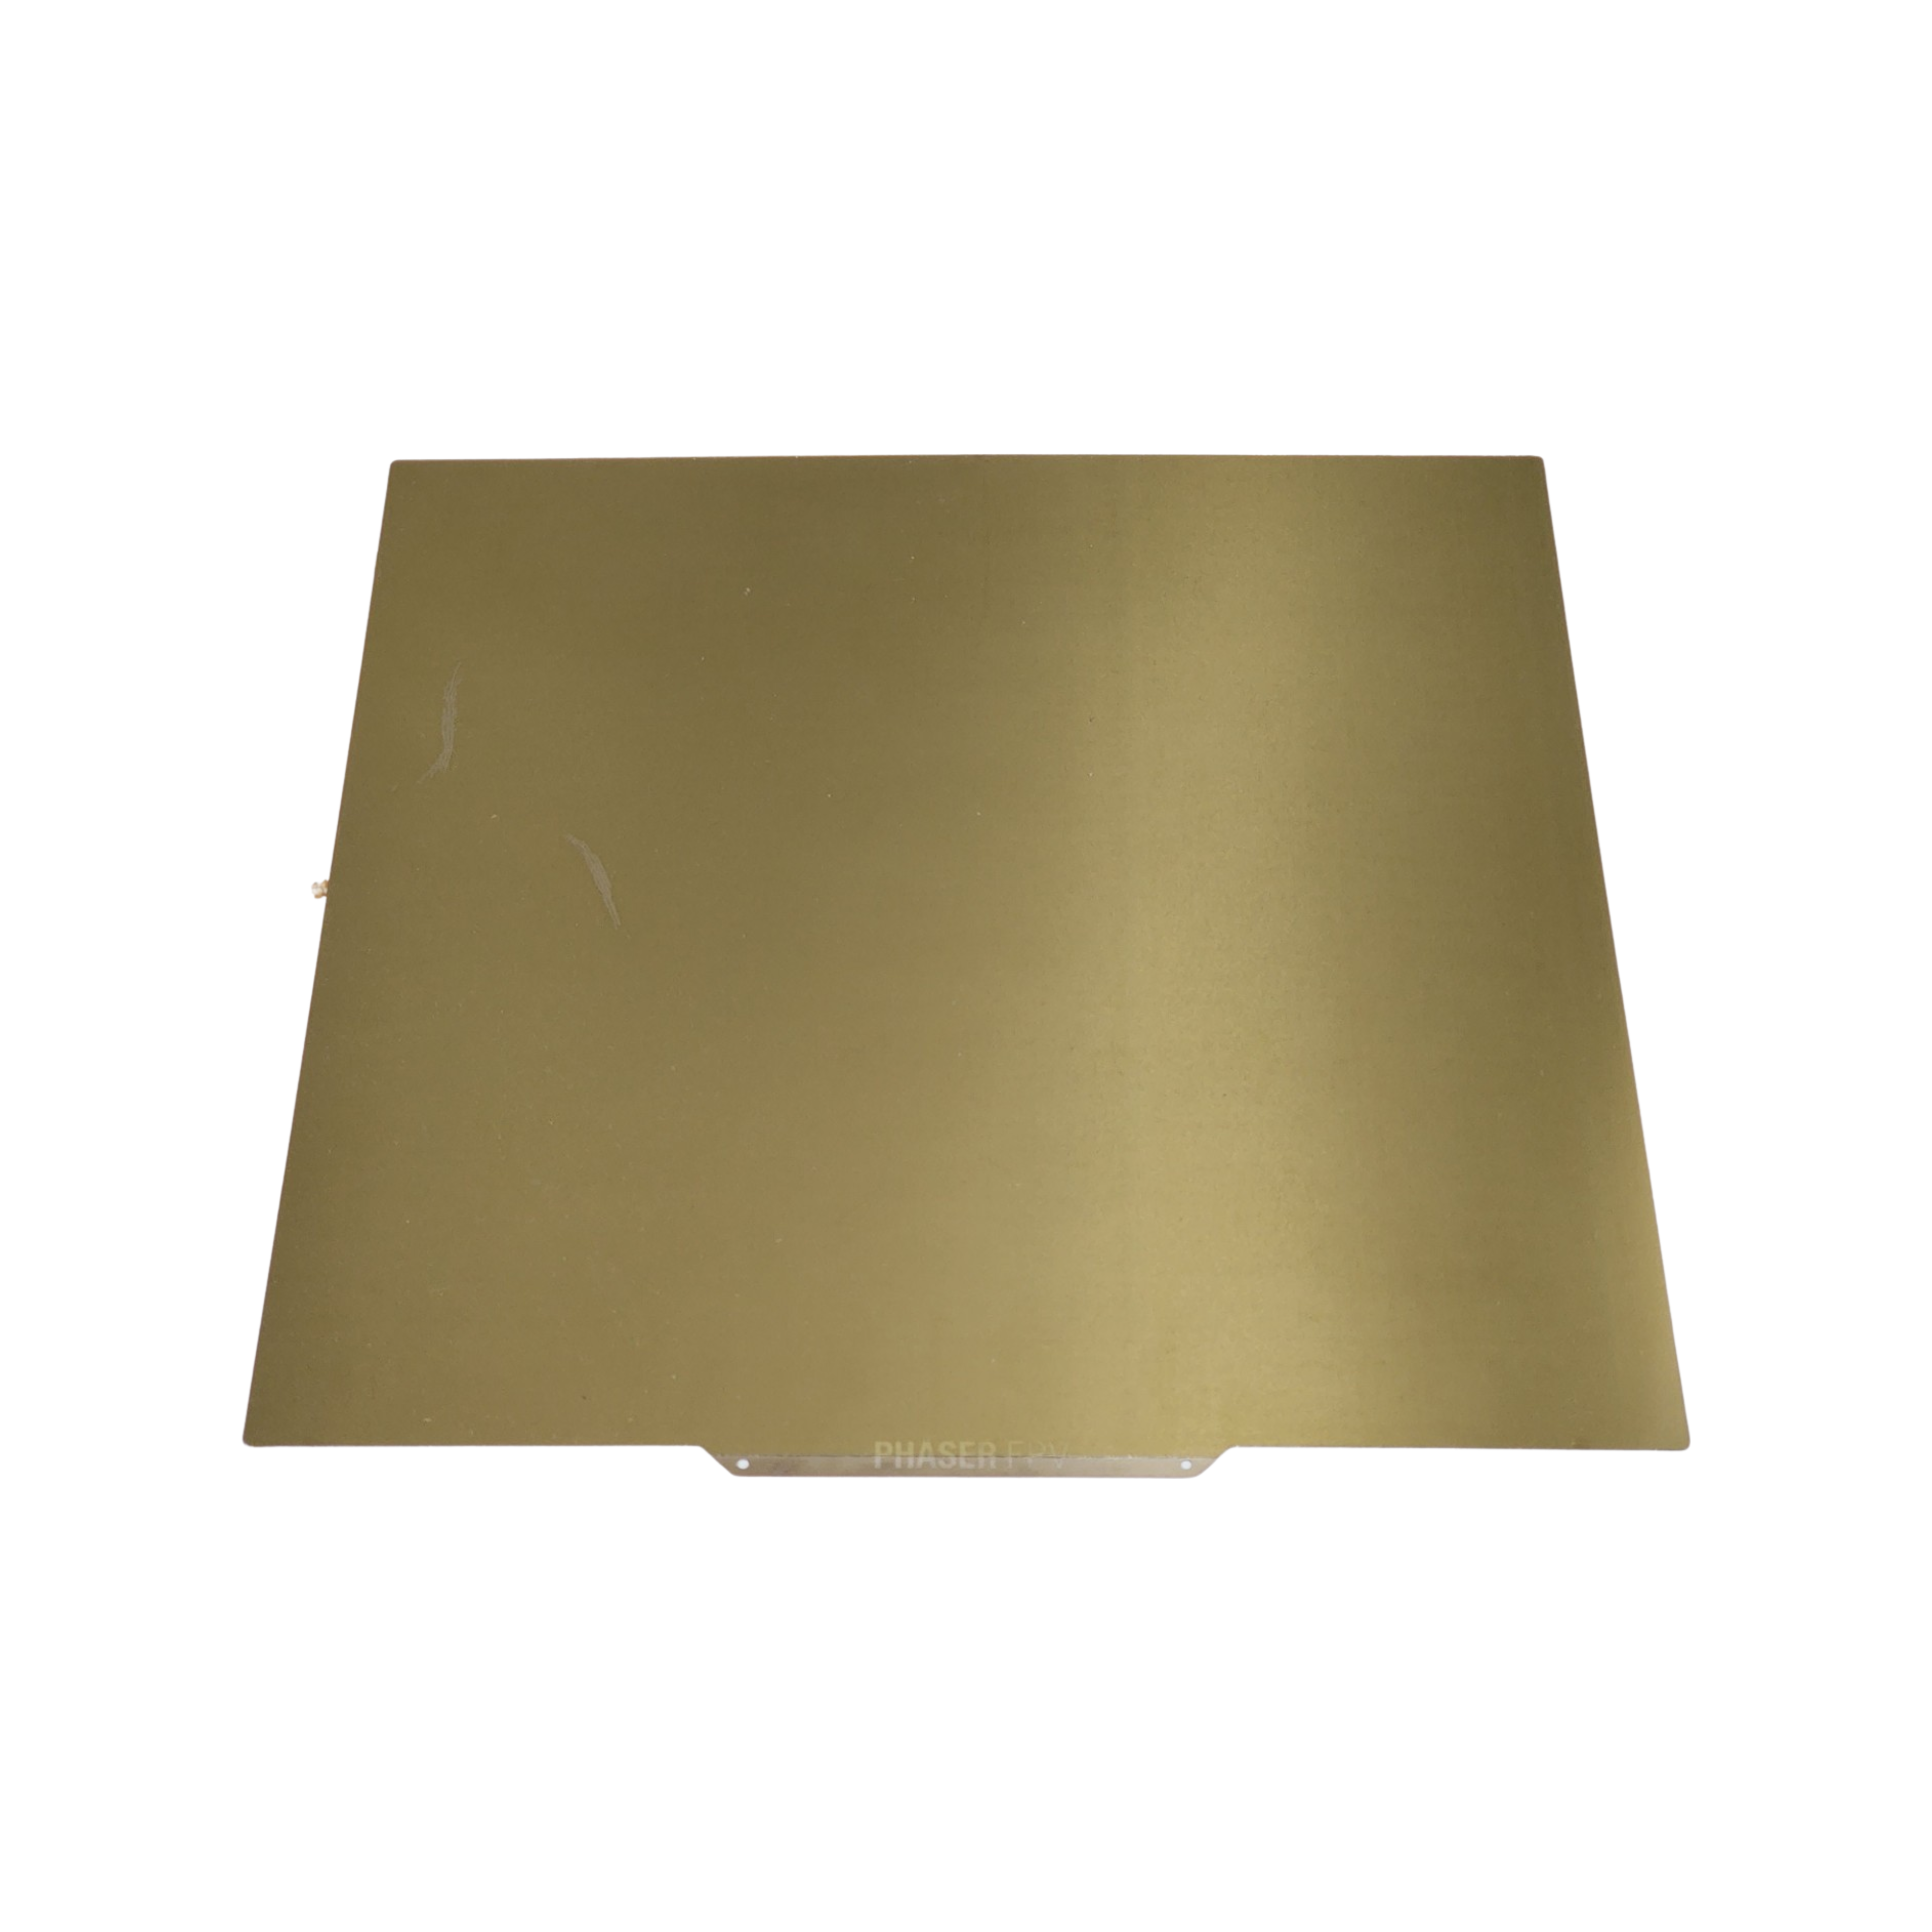 Energetic 508x508mm DOUBLE SIDED Smooth PEI/Textured Gold Spring Steel Sheet (Suits Ratrig)